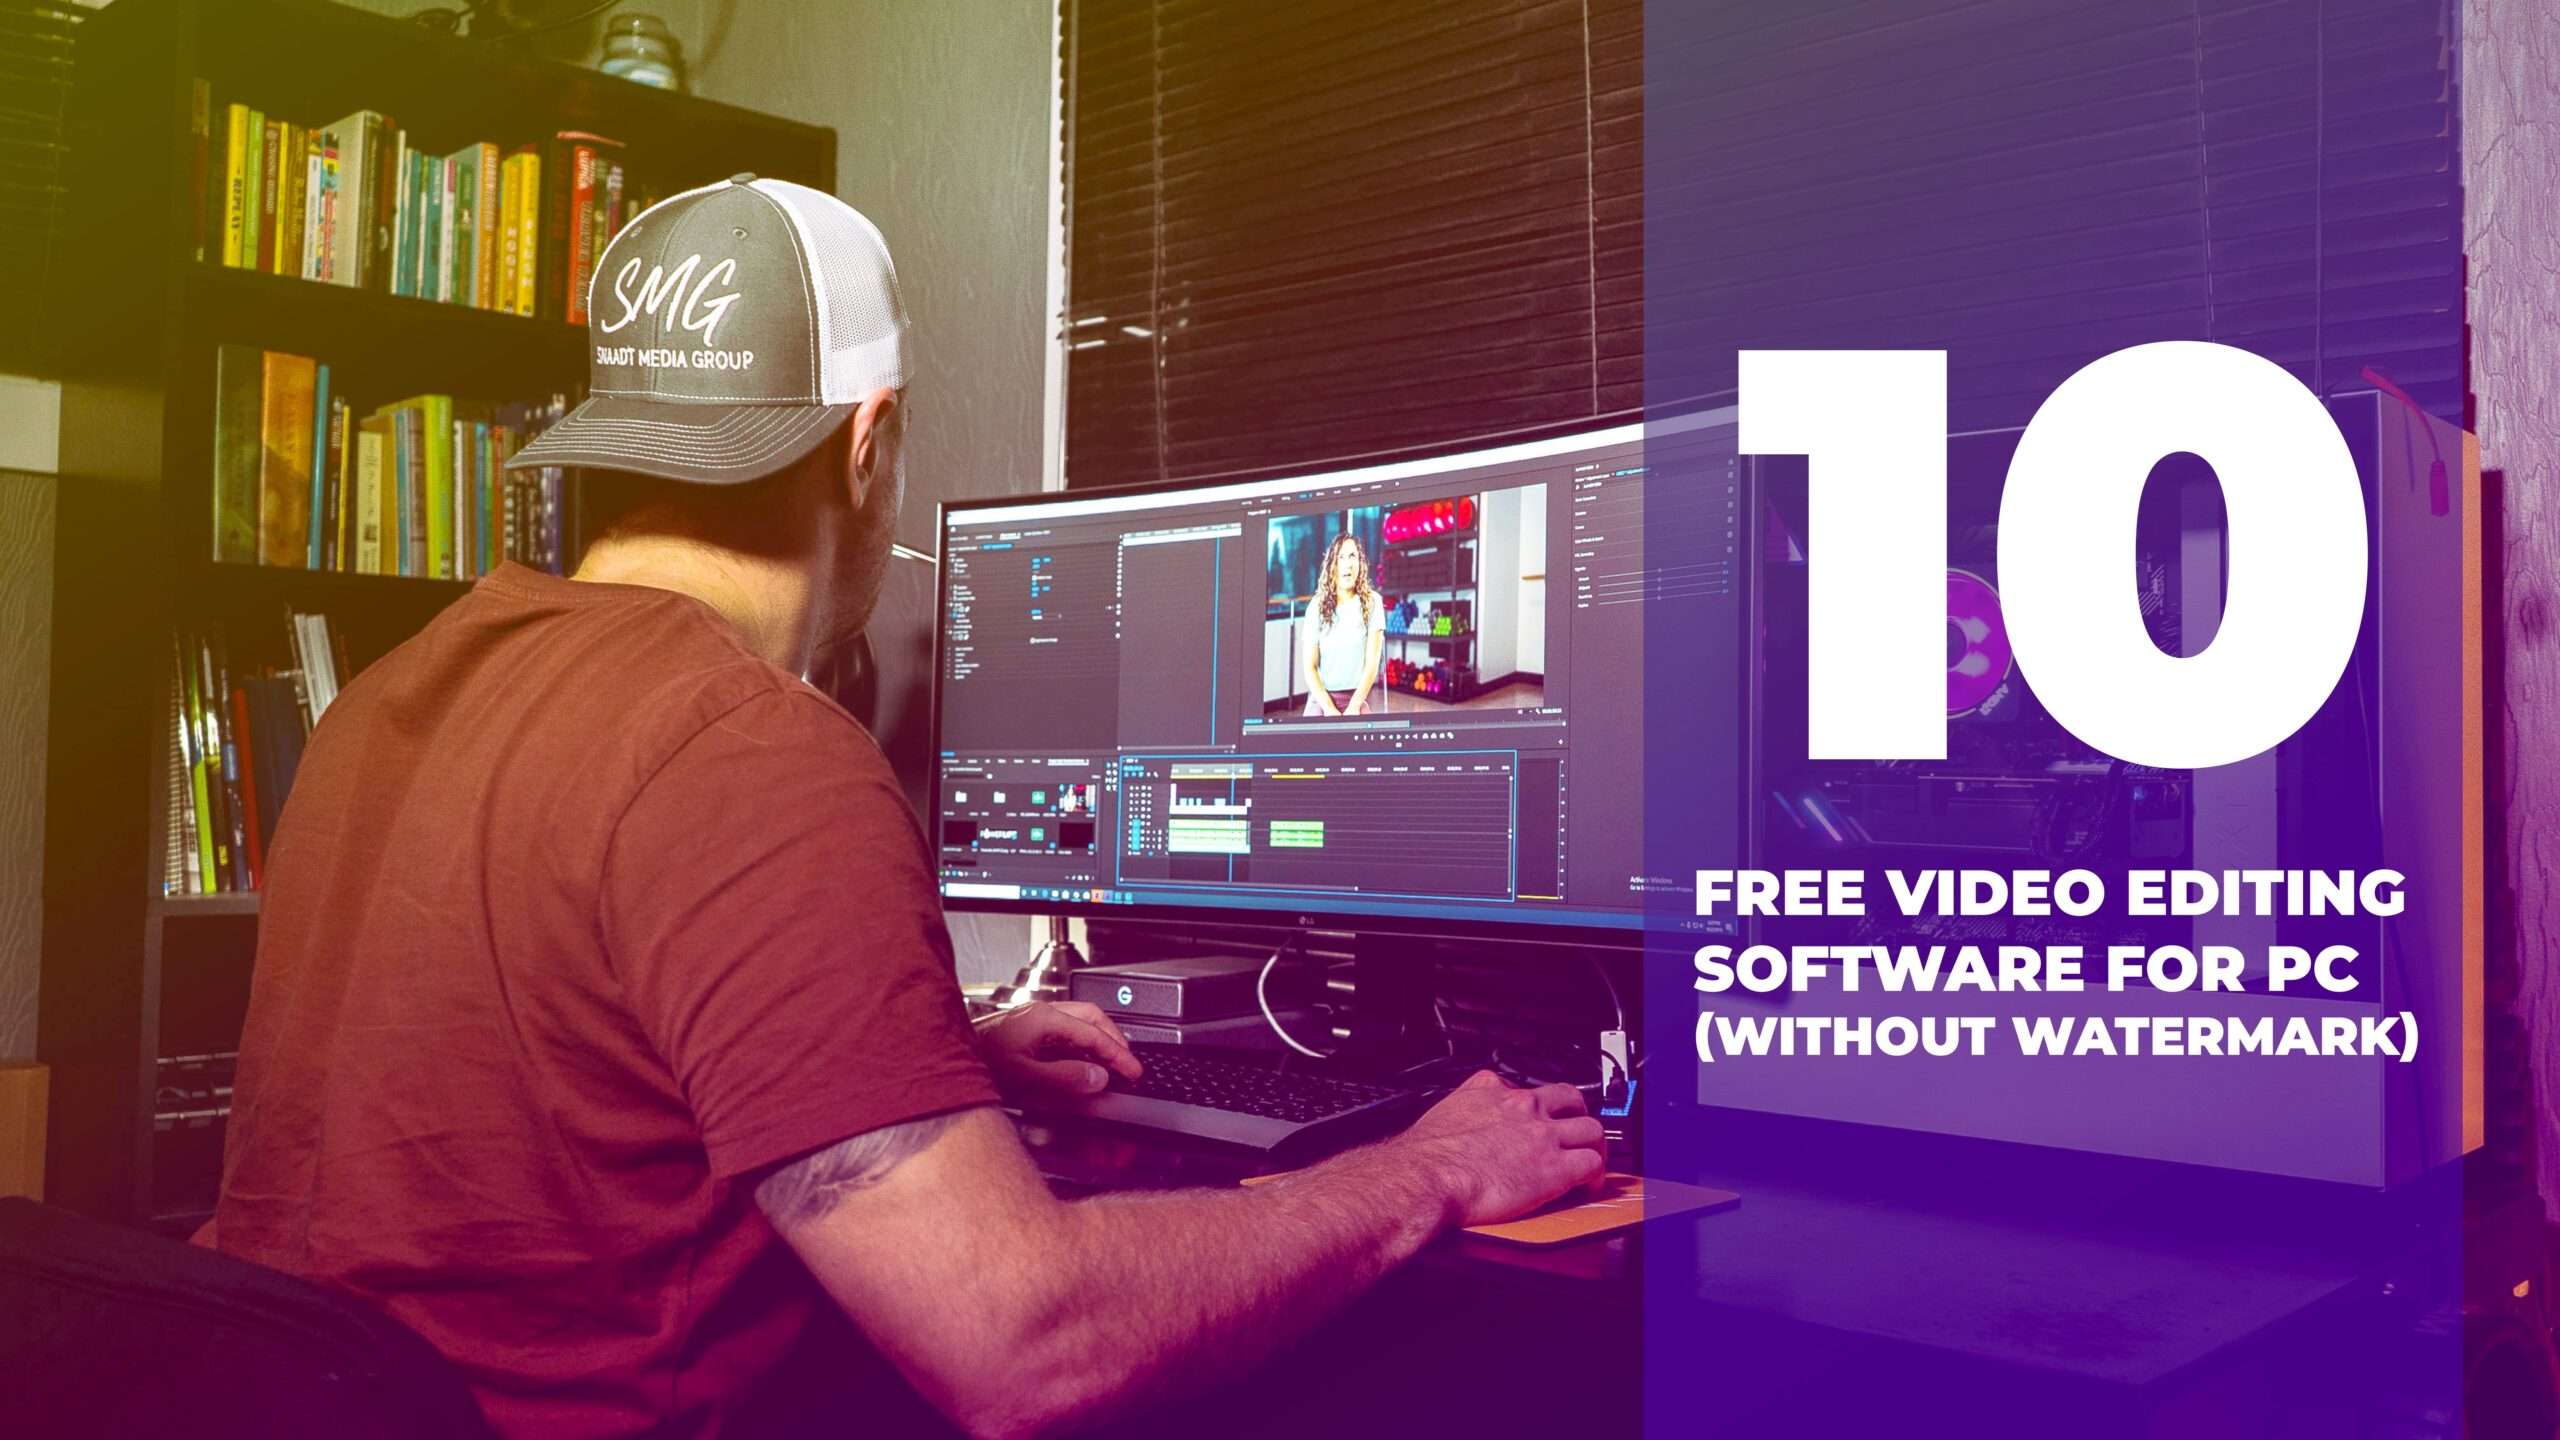 Free Video Editing Software For PC Without Watermark